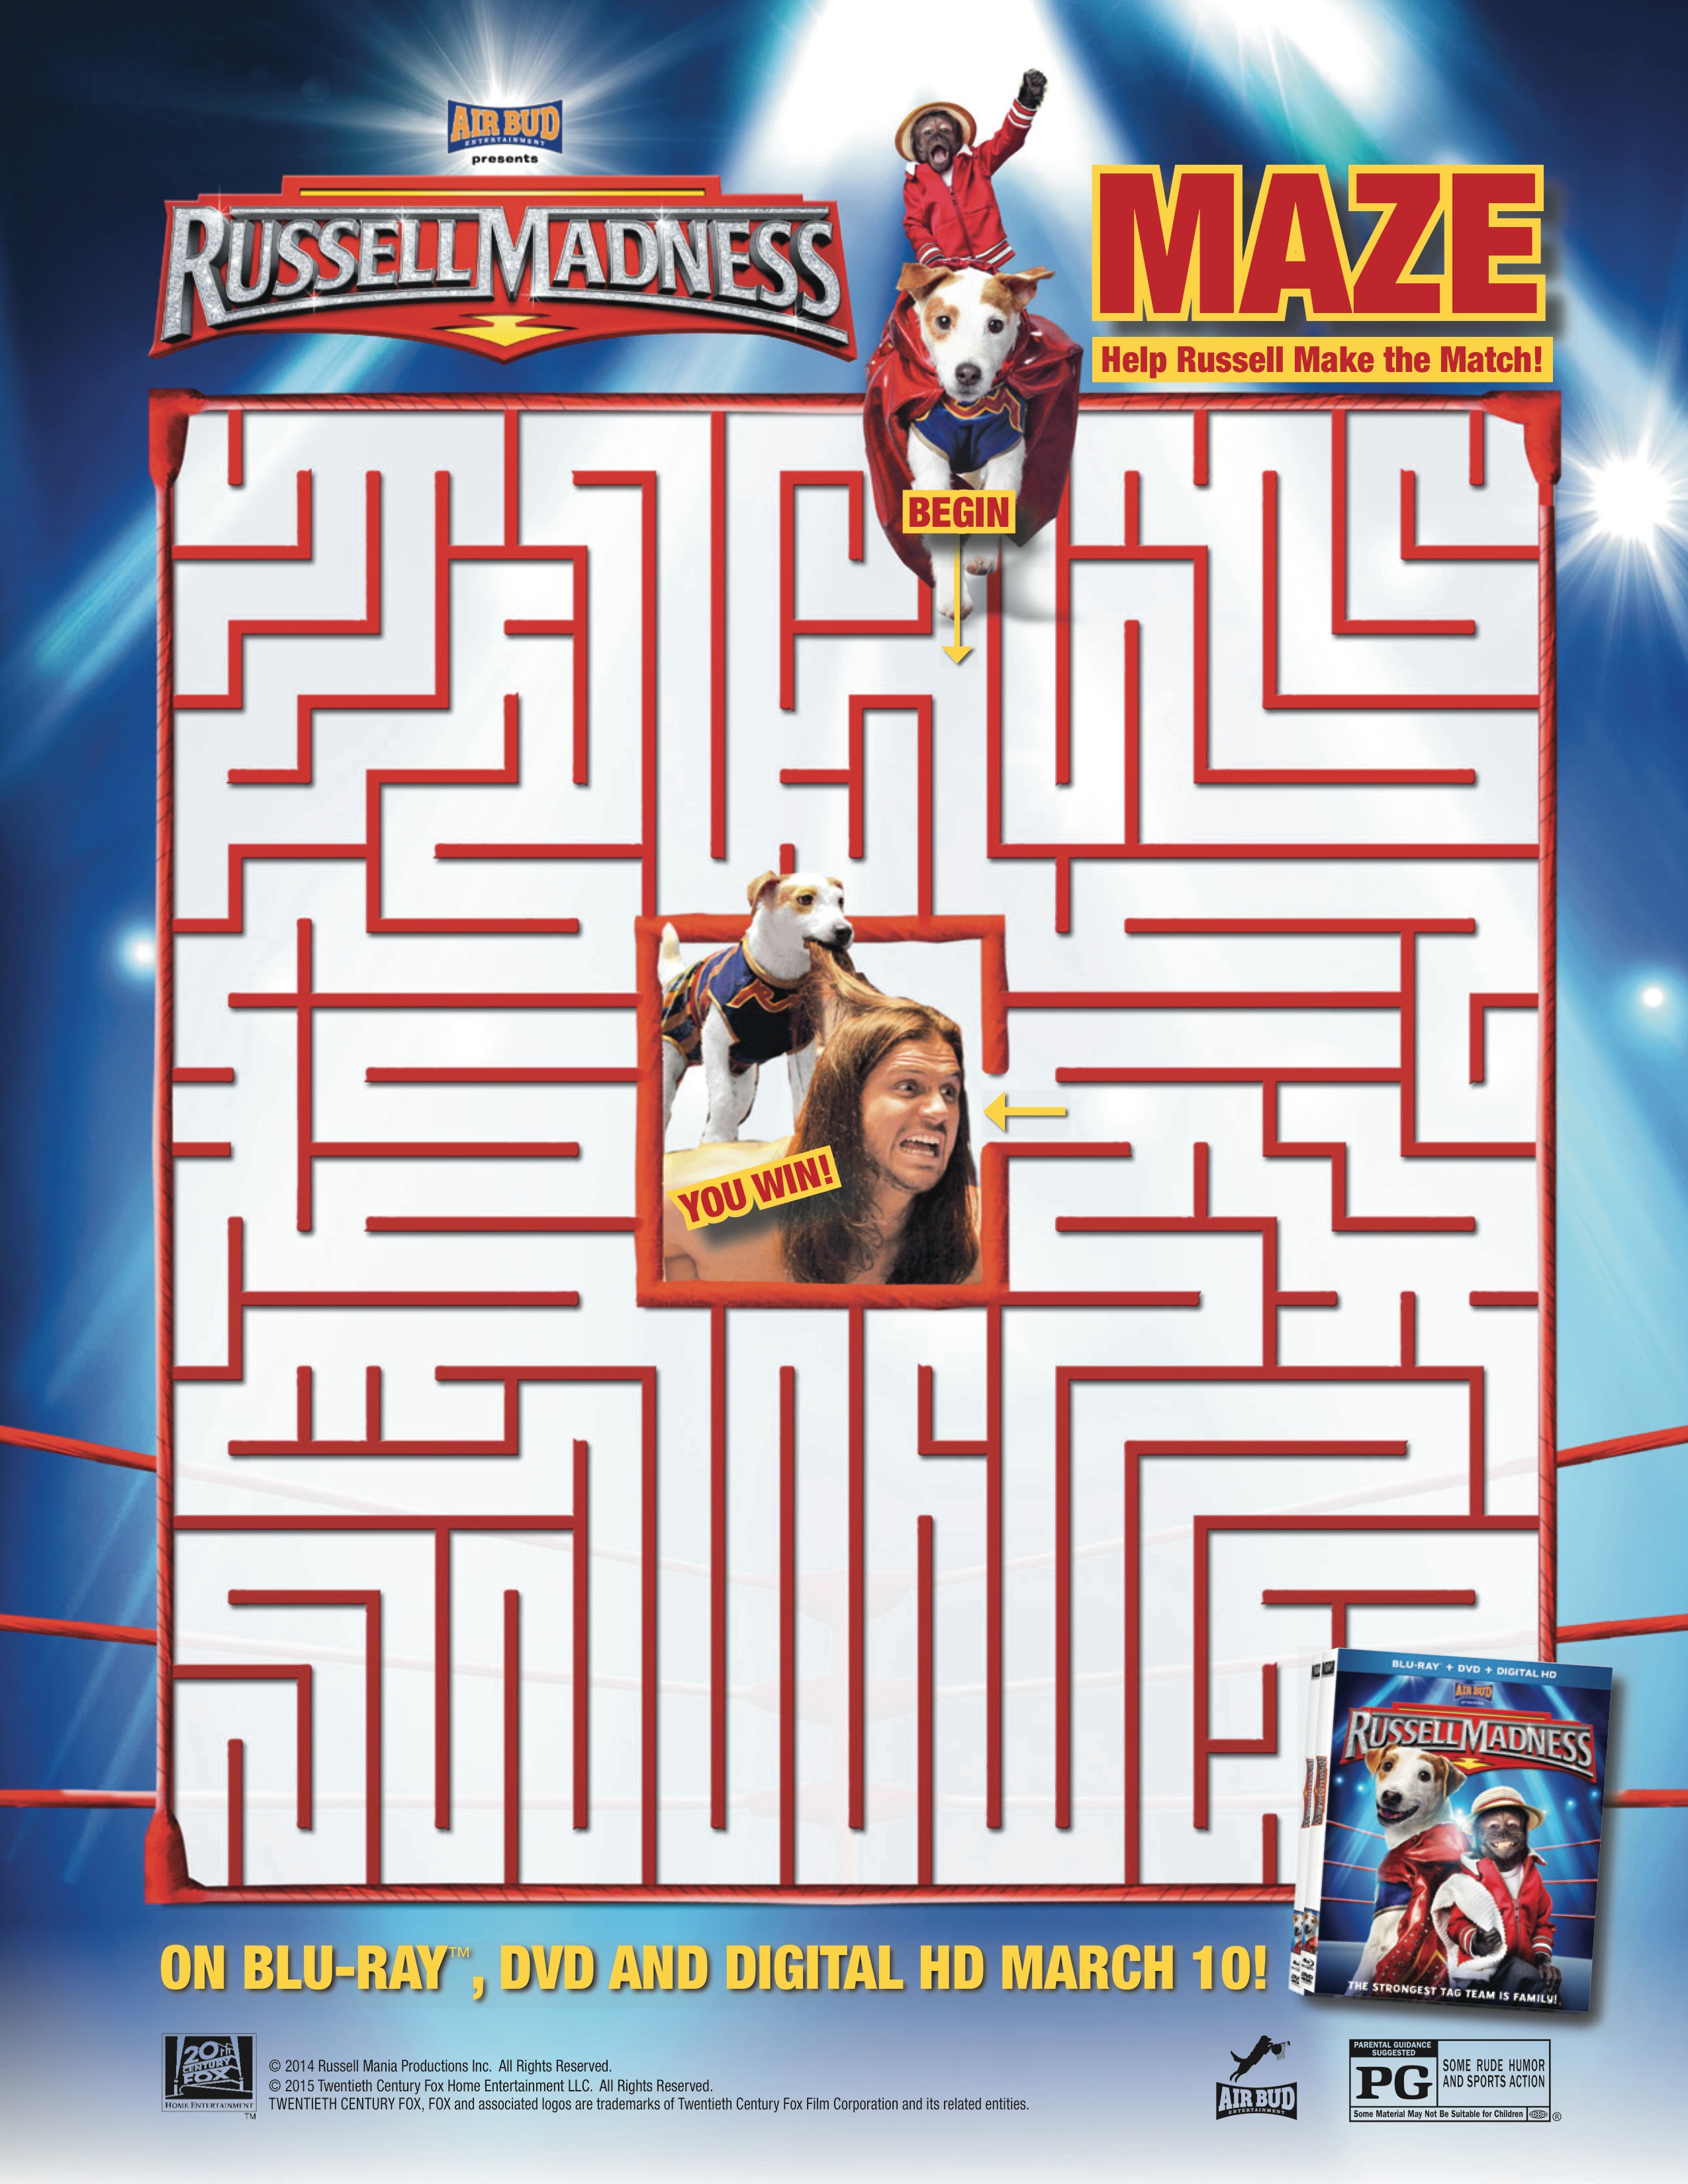 RUSSELL MADNESS Activity Sheets #RussellInsiders